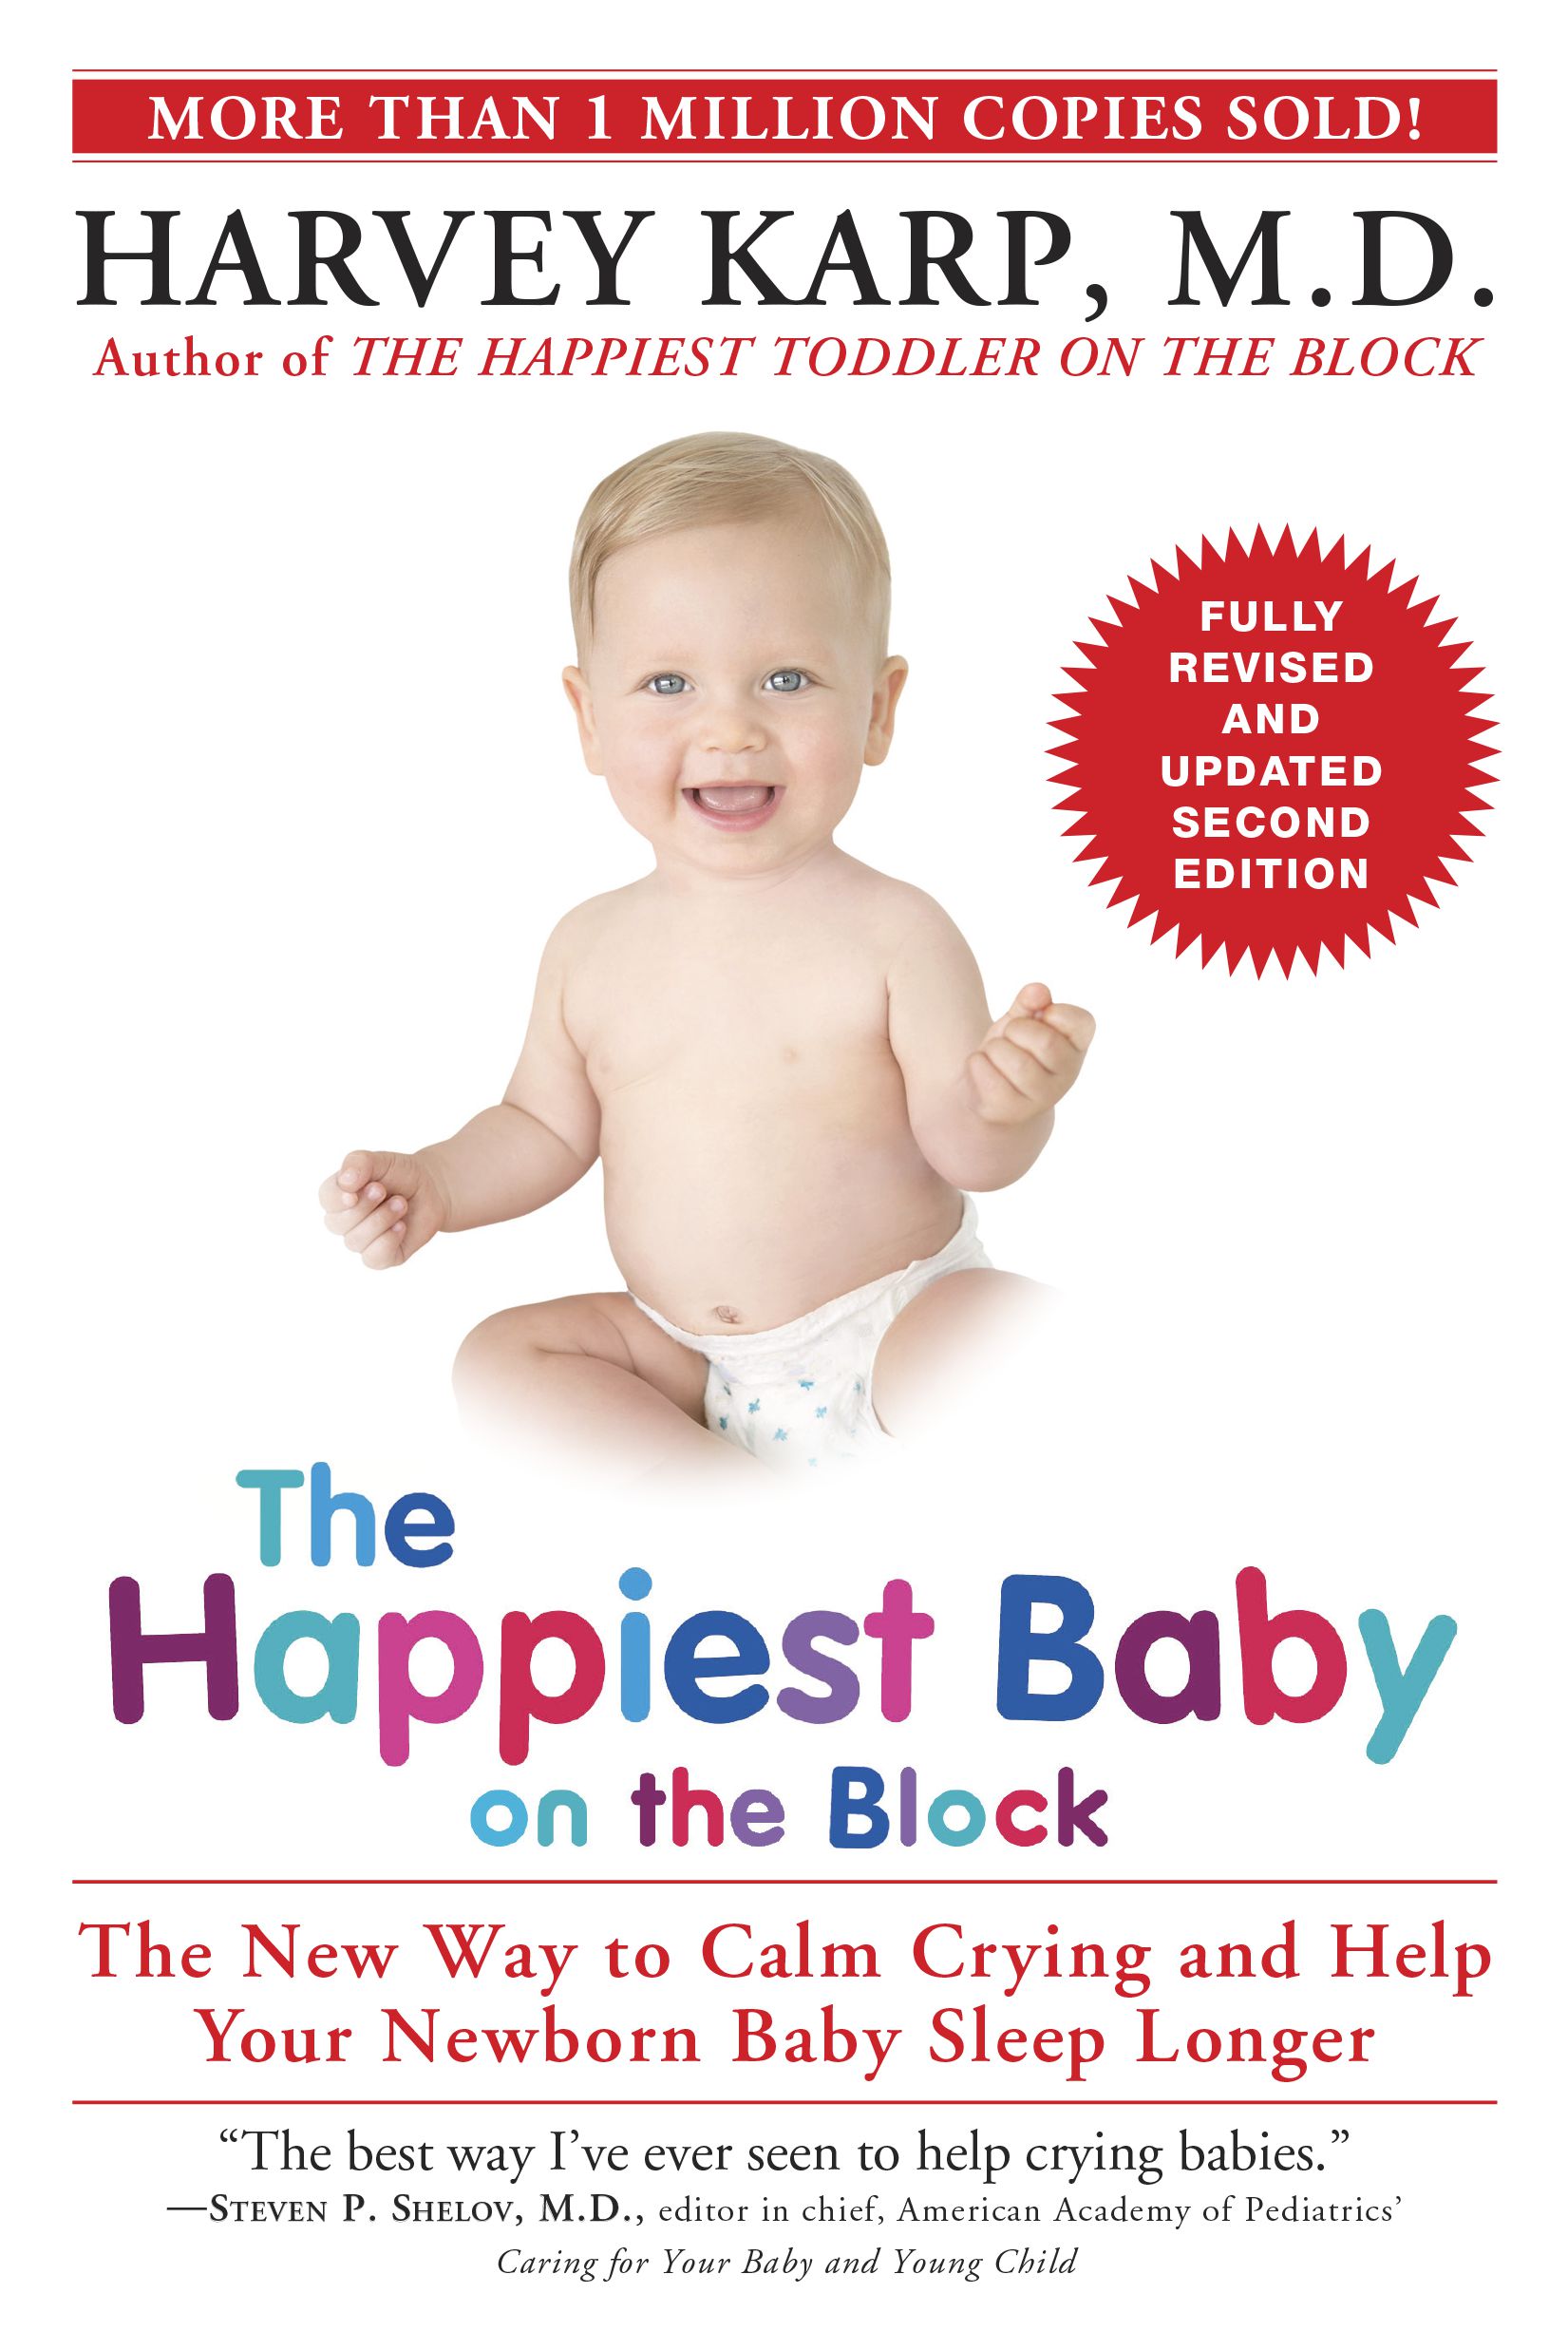 "The Happiest Baby on the Block" by Harvey Karp, M.D.